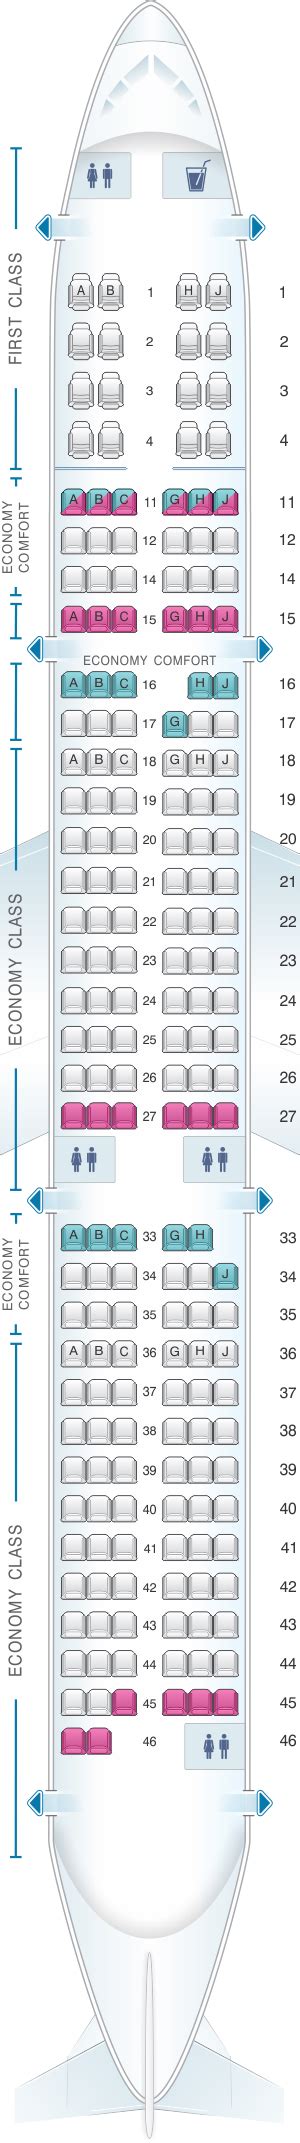 2. Re: Hawaiian Airlines Airbus 330-200 under seat storage. The width of the seat does not affect the amount of under seat storage. ALL seats in the aircraft mount to the floor rail systems, which is spaced the same distance apart throughout the plane. The difference in seat width is due to the tray tables being in the armrests in bulkhead and .... 